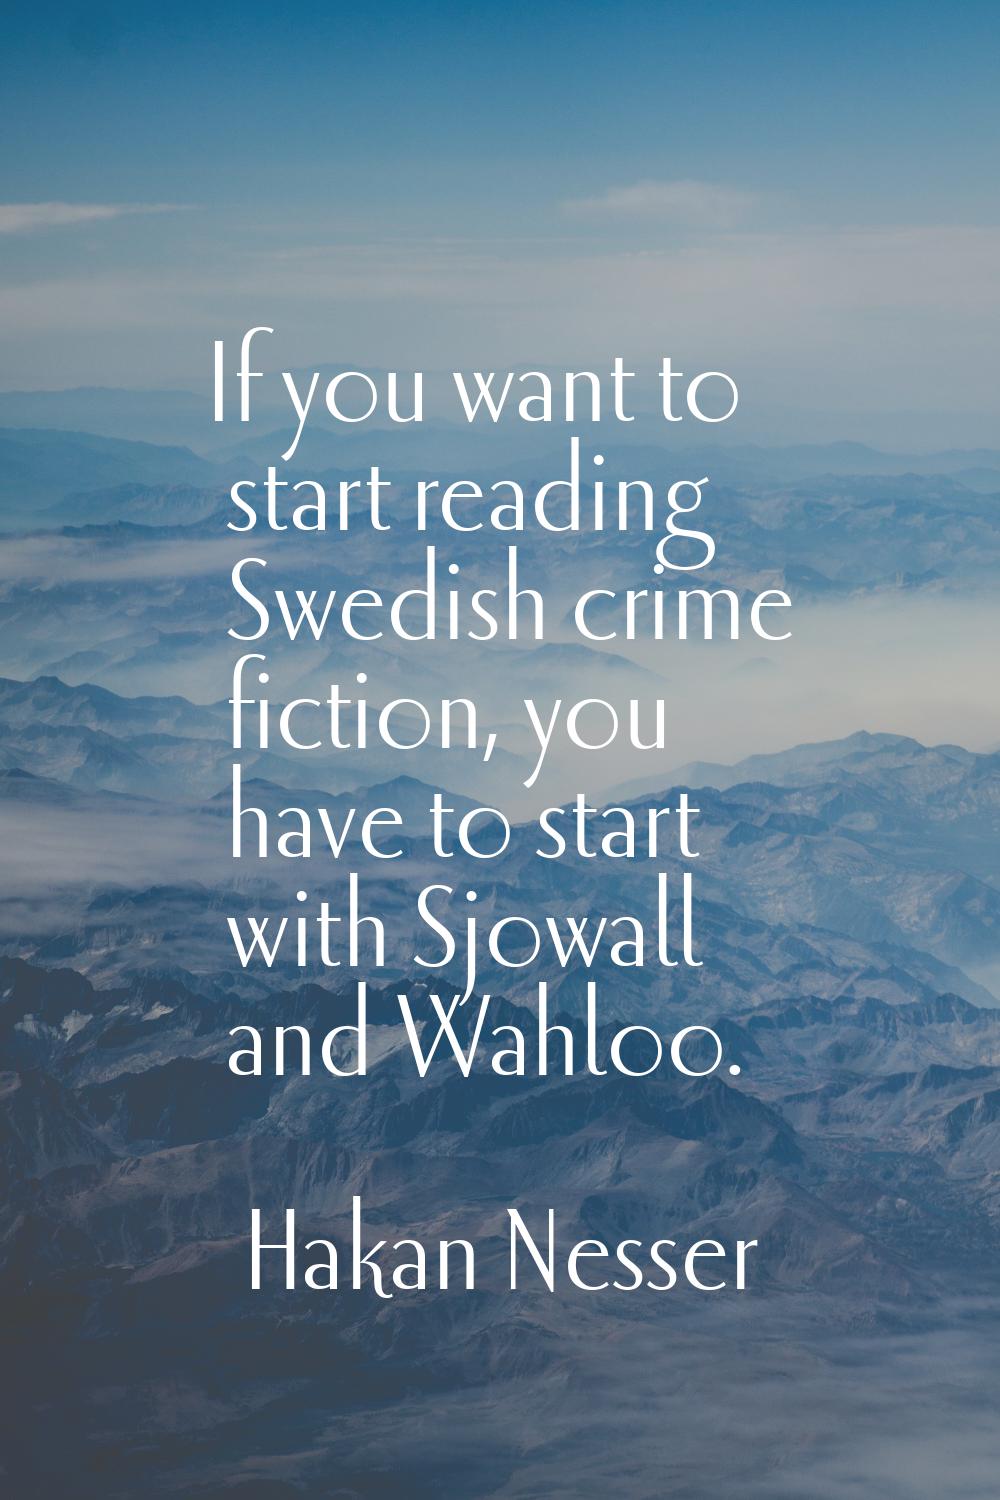 If you want to start reading Swedish crime fiction, you have to start with Sjowall and Wahloo.